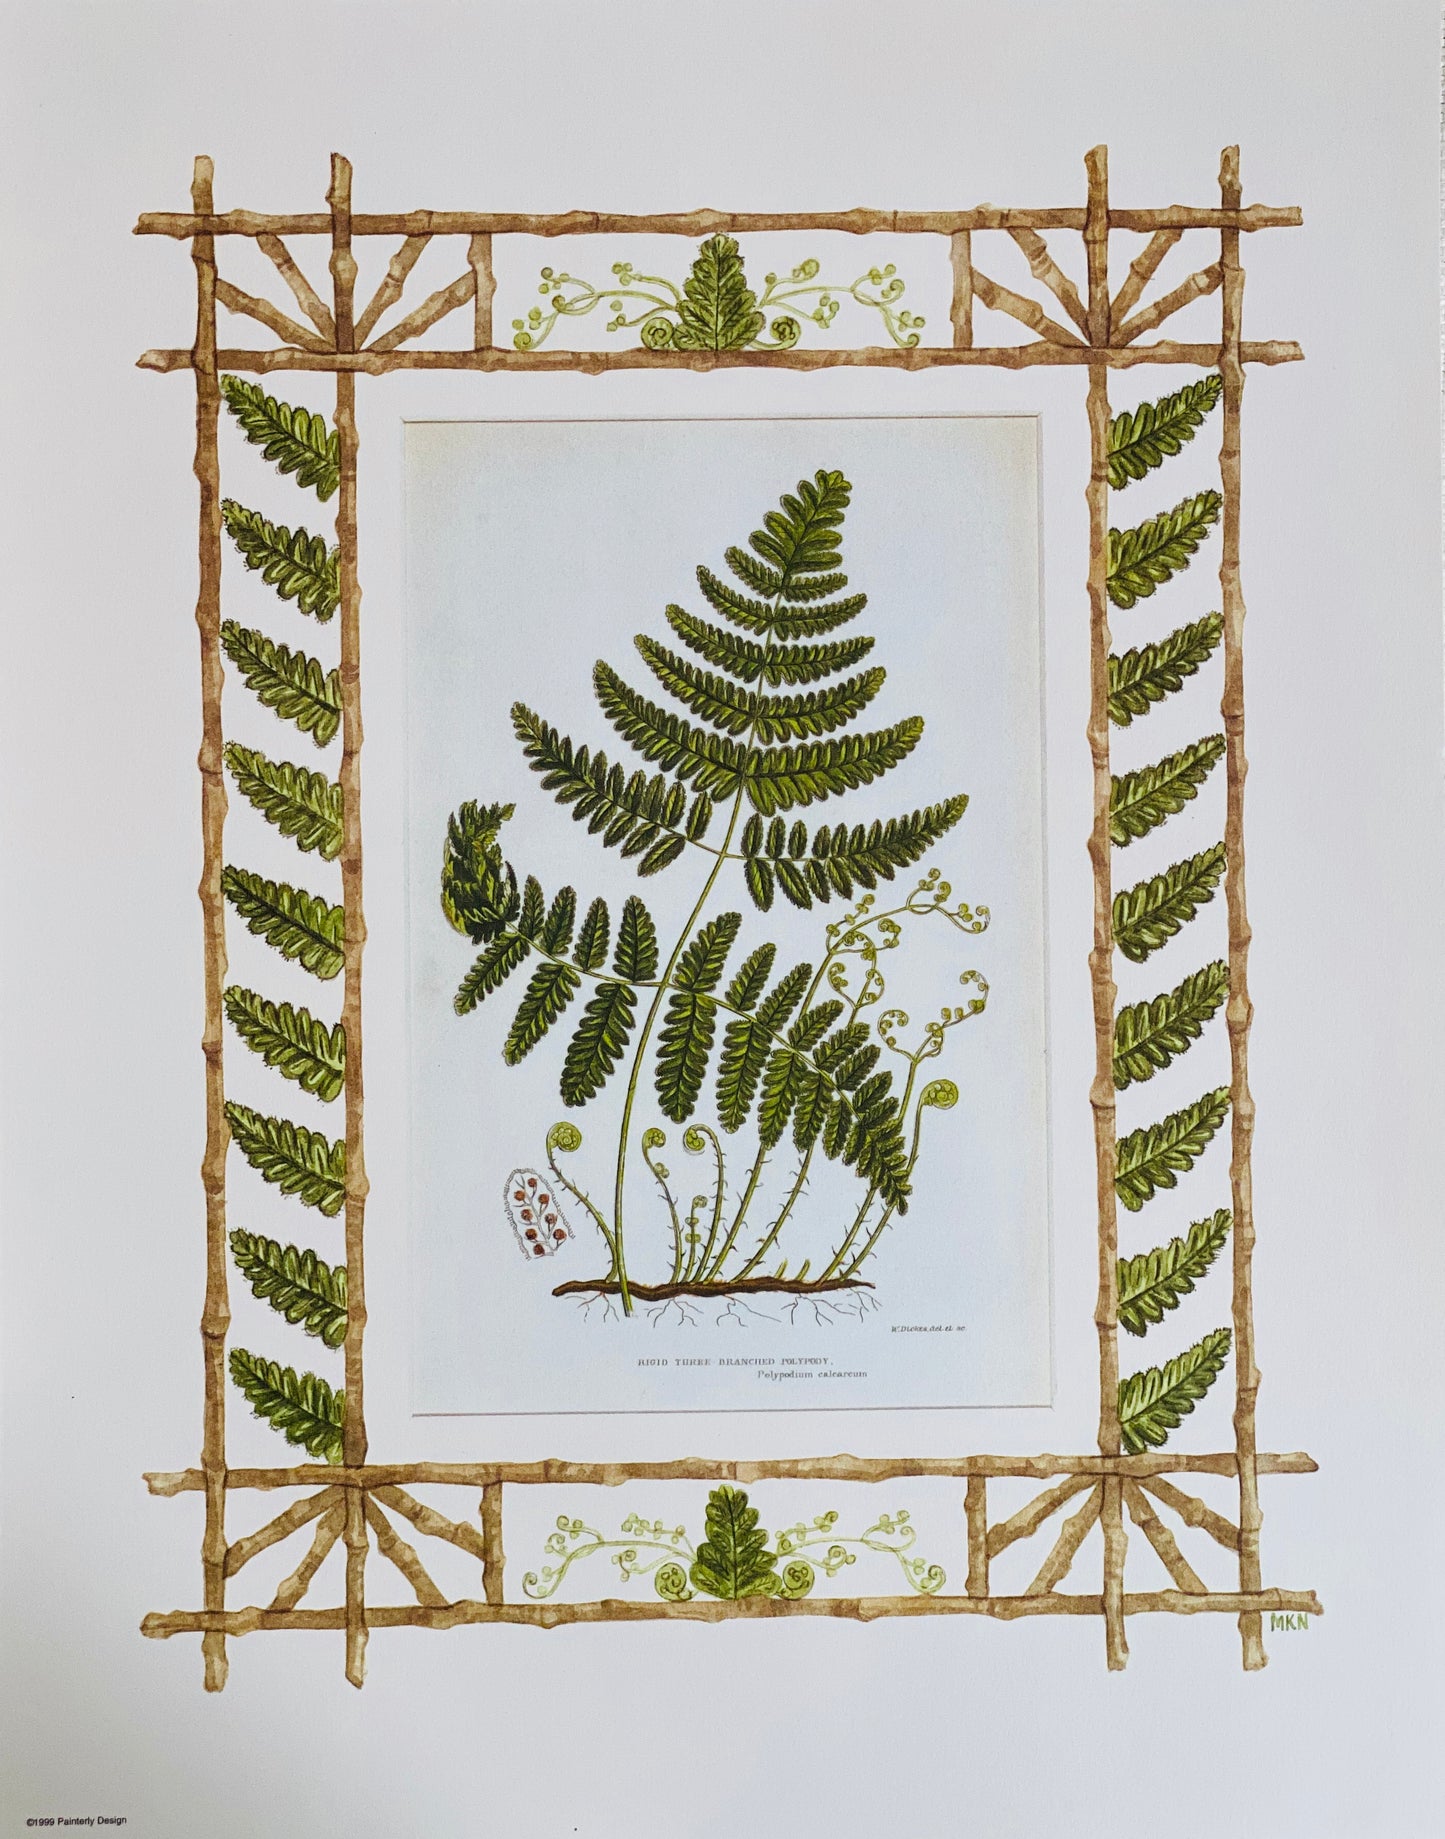 Set of 4 Fern antique prints with hand-painted borders